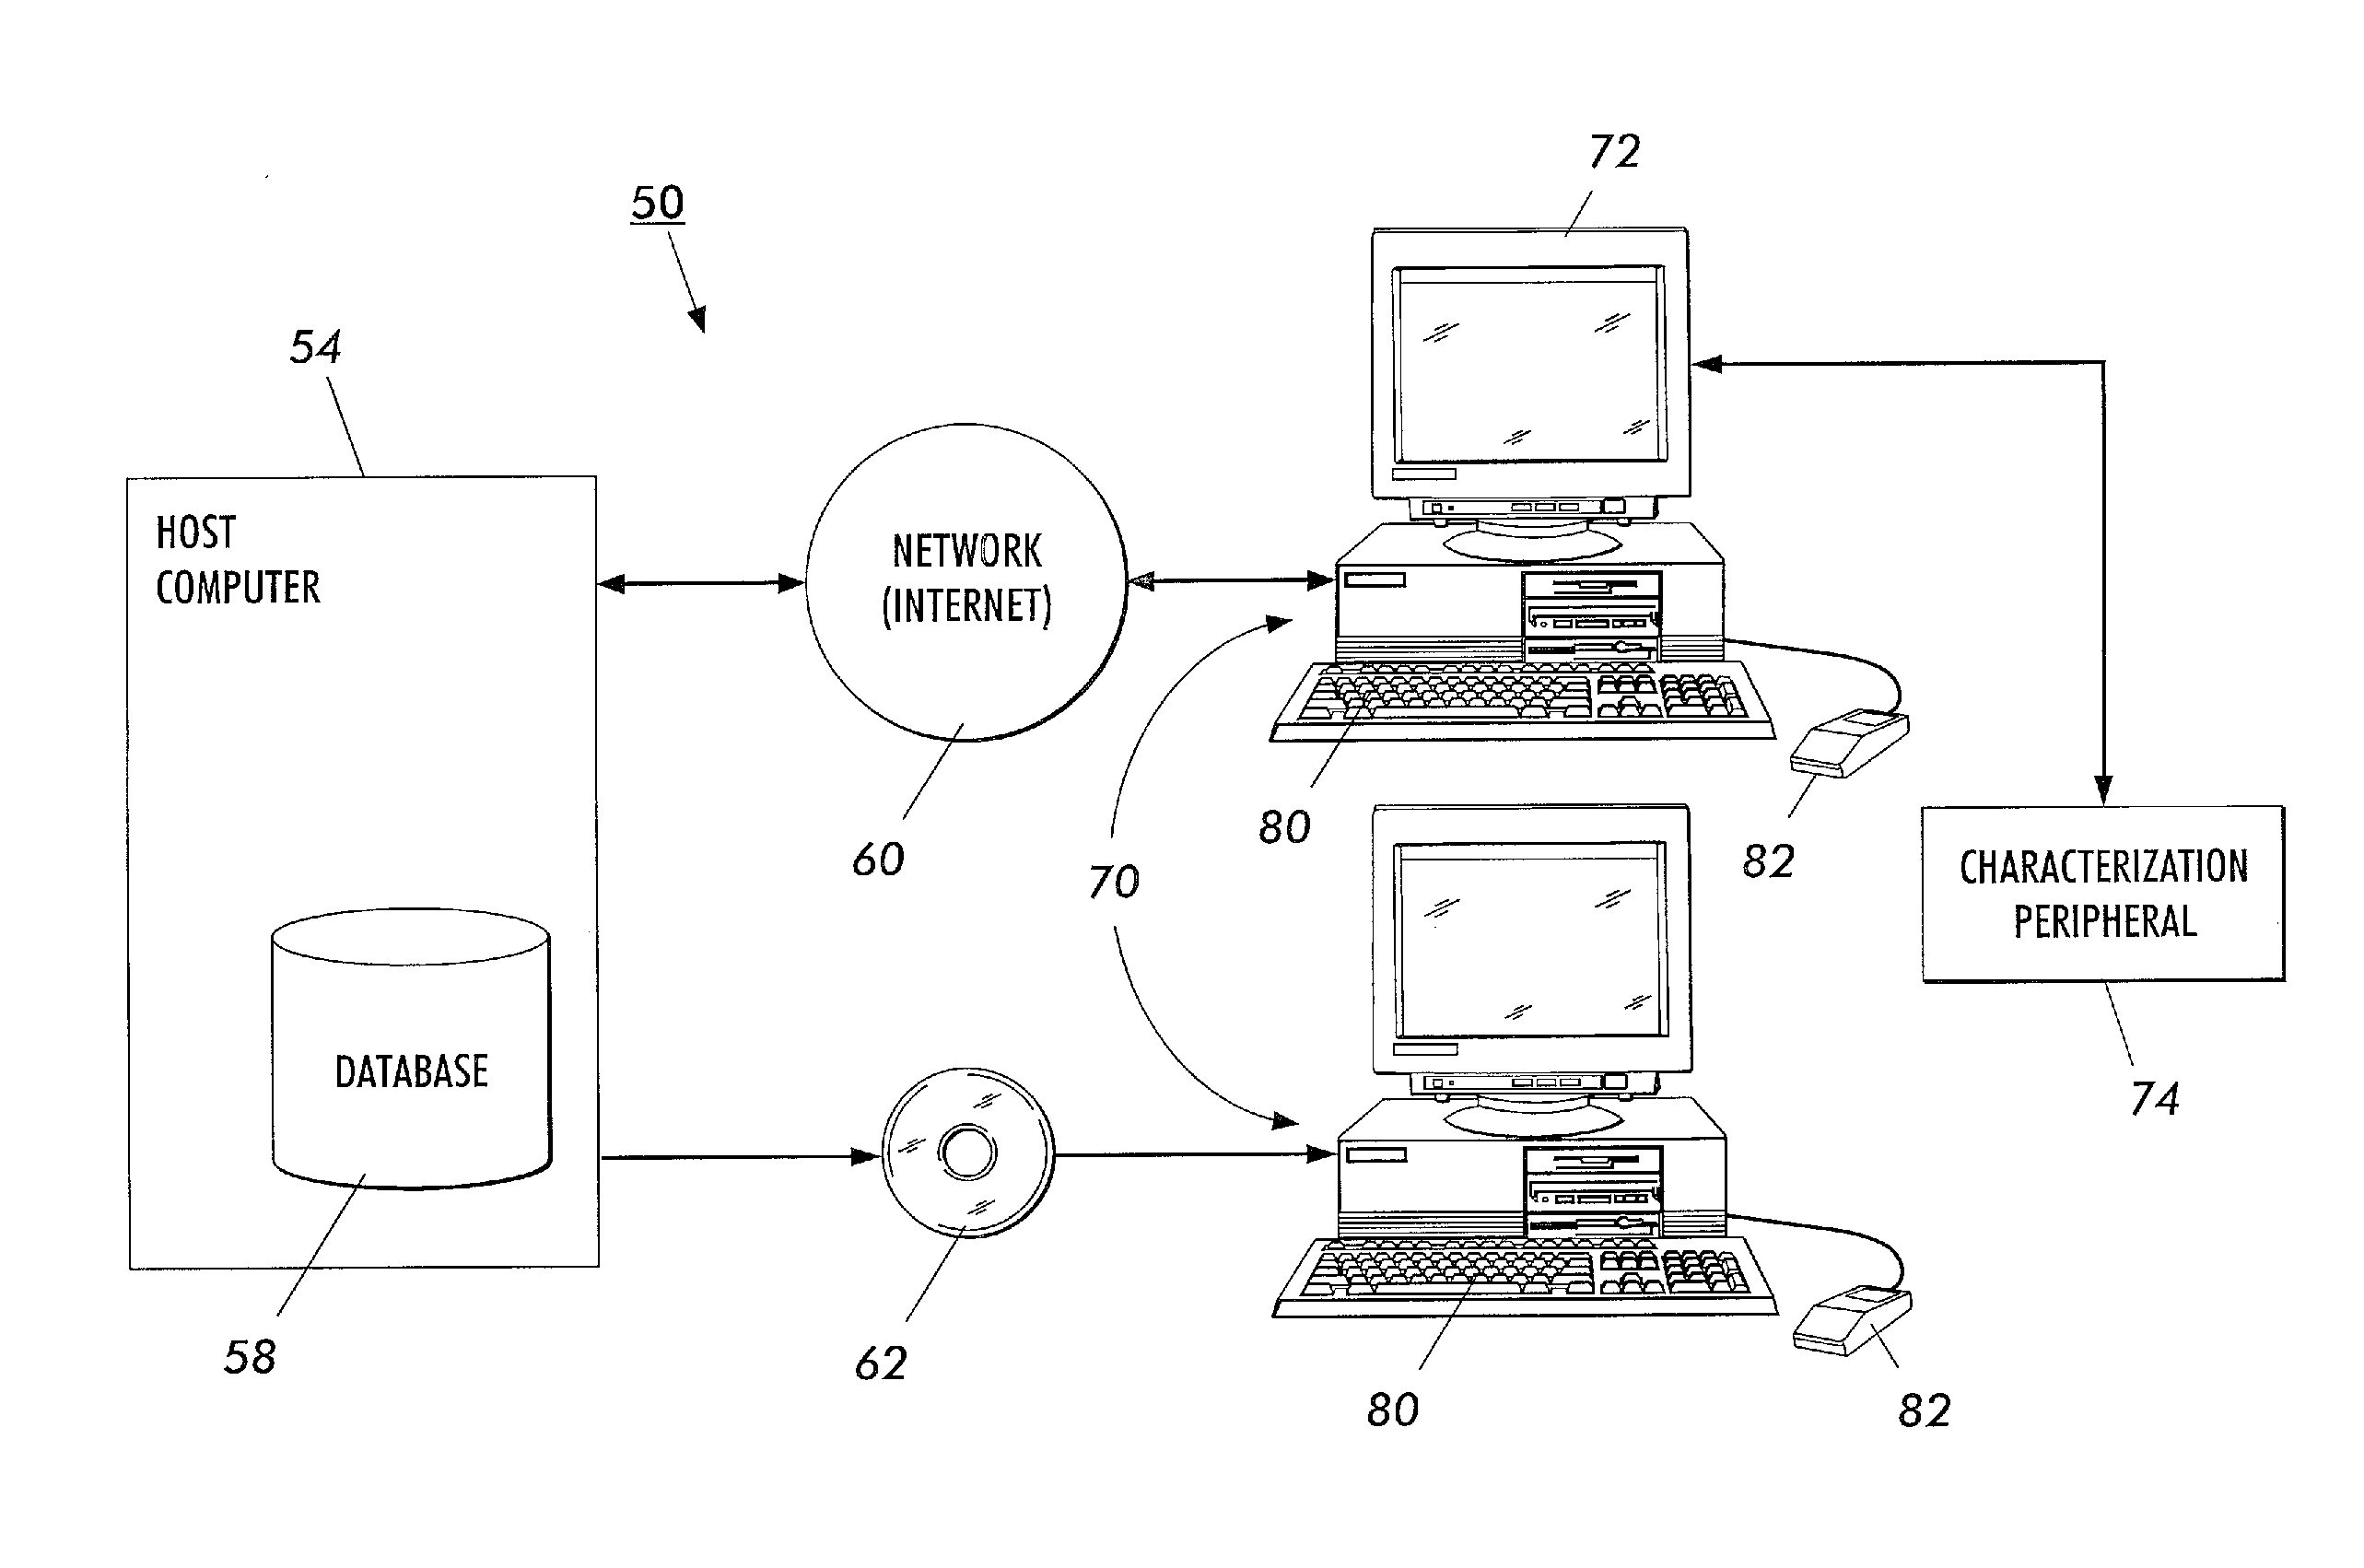 System and method to aid diagnoses using cross-referenced knowledge and image databases